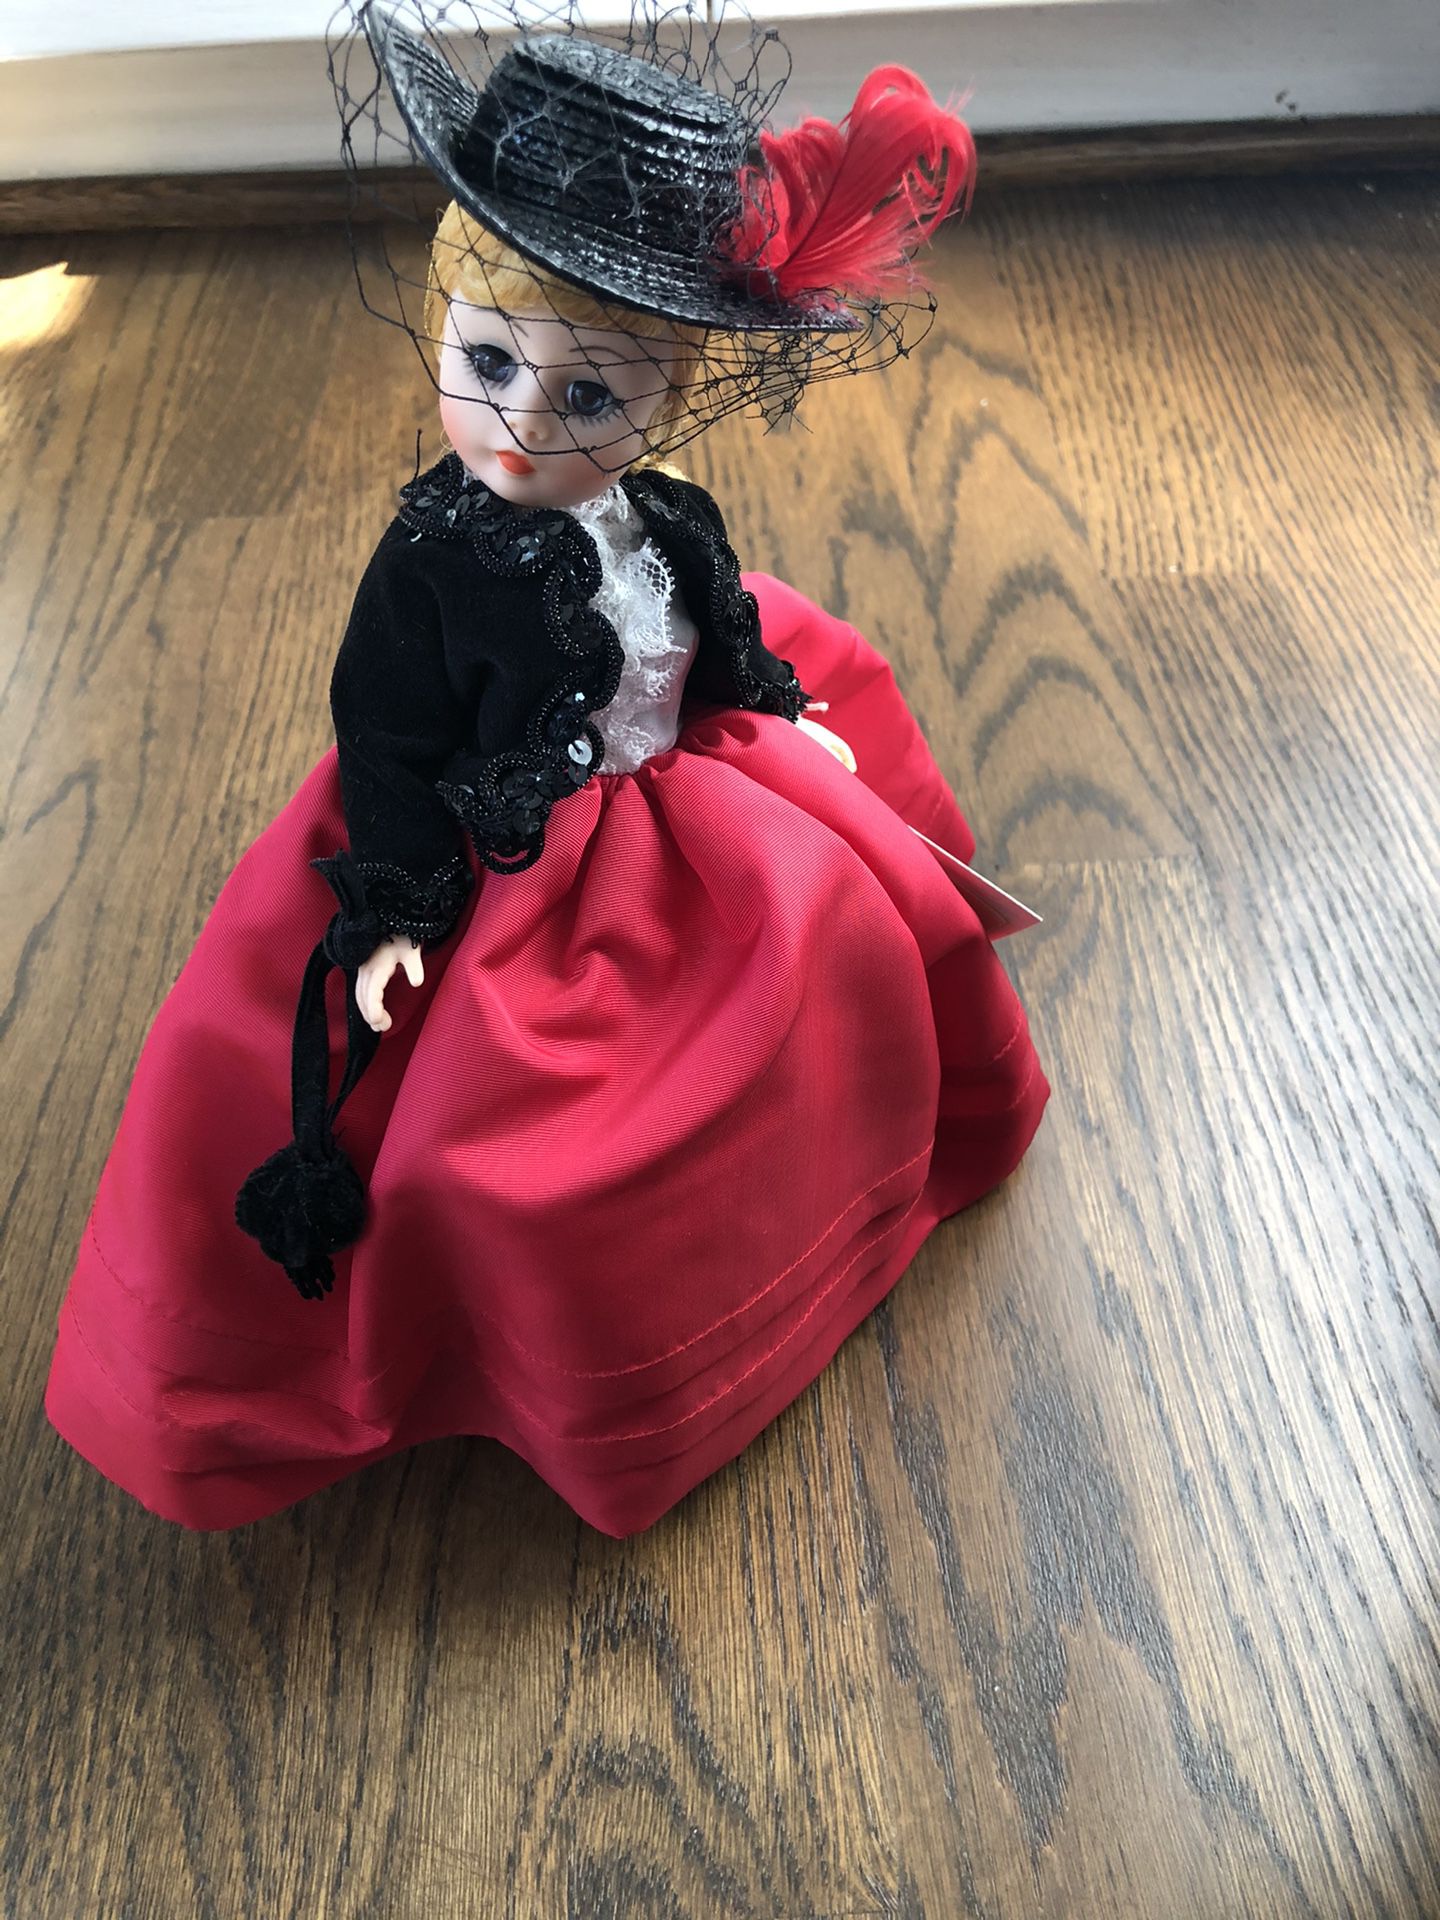 Madame Alexander doll-Lilly the portrette series